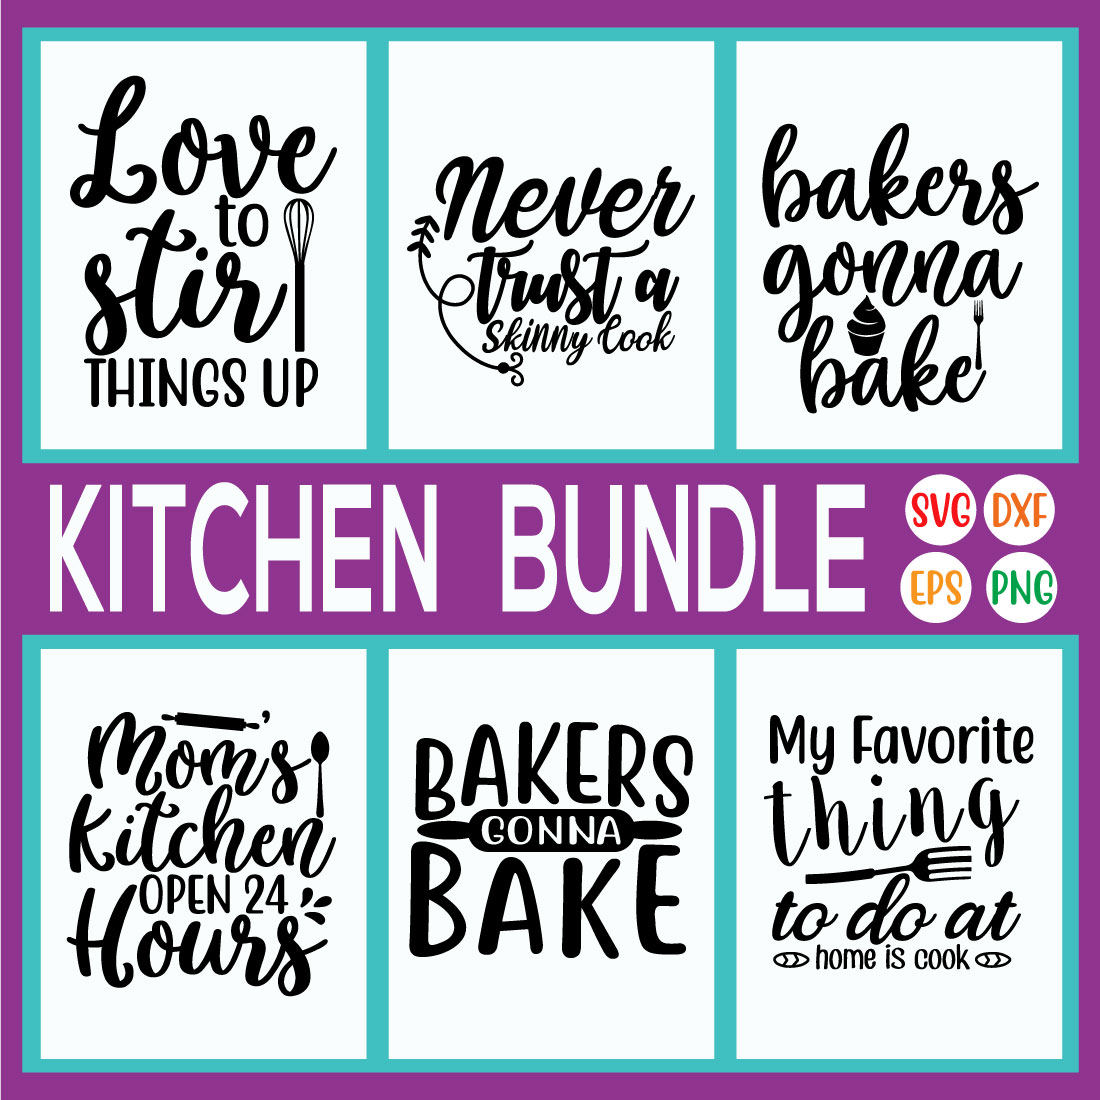 Funny Kitchen Quote Bundle Vol2 cover image.